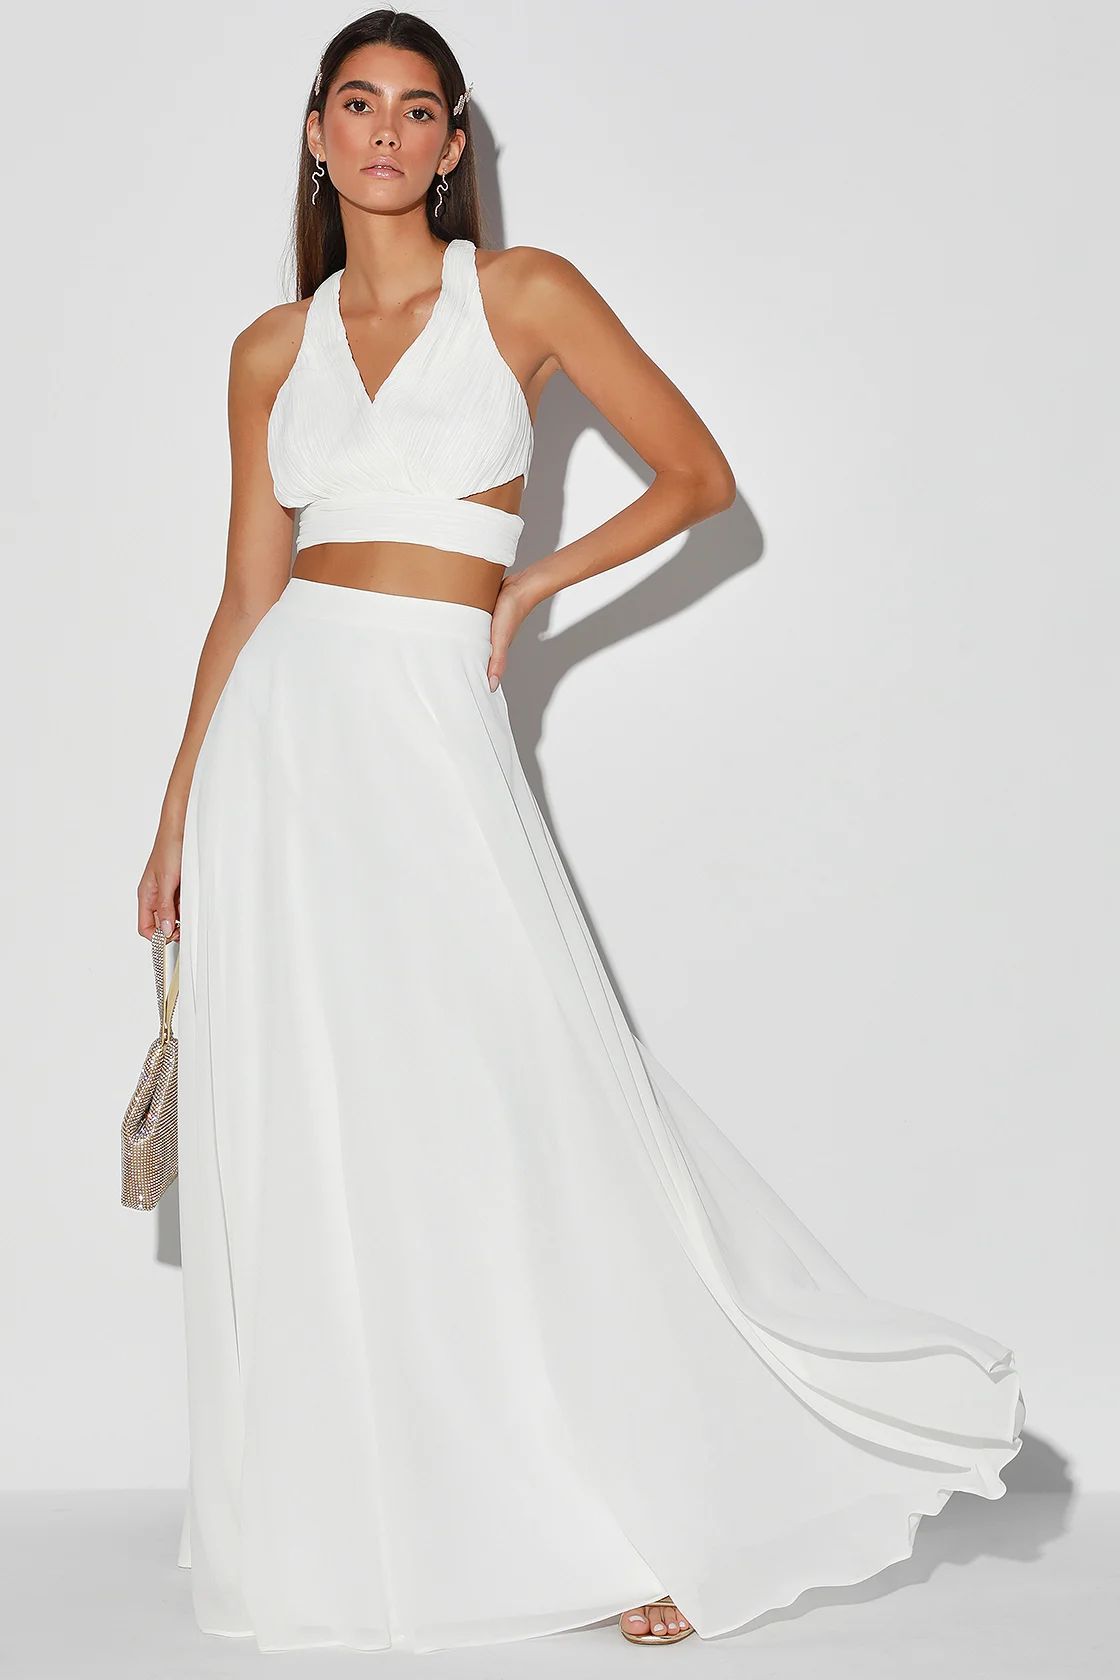 For the Glam White Pleated Two-Piece Maxi Dress | Lulus